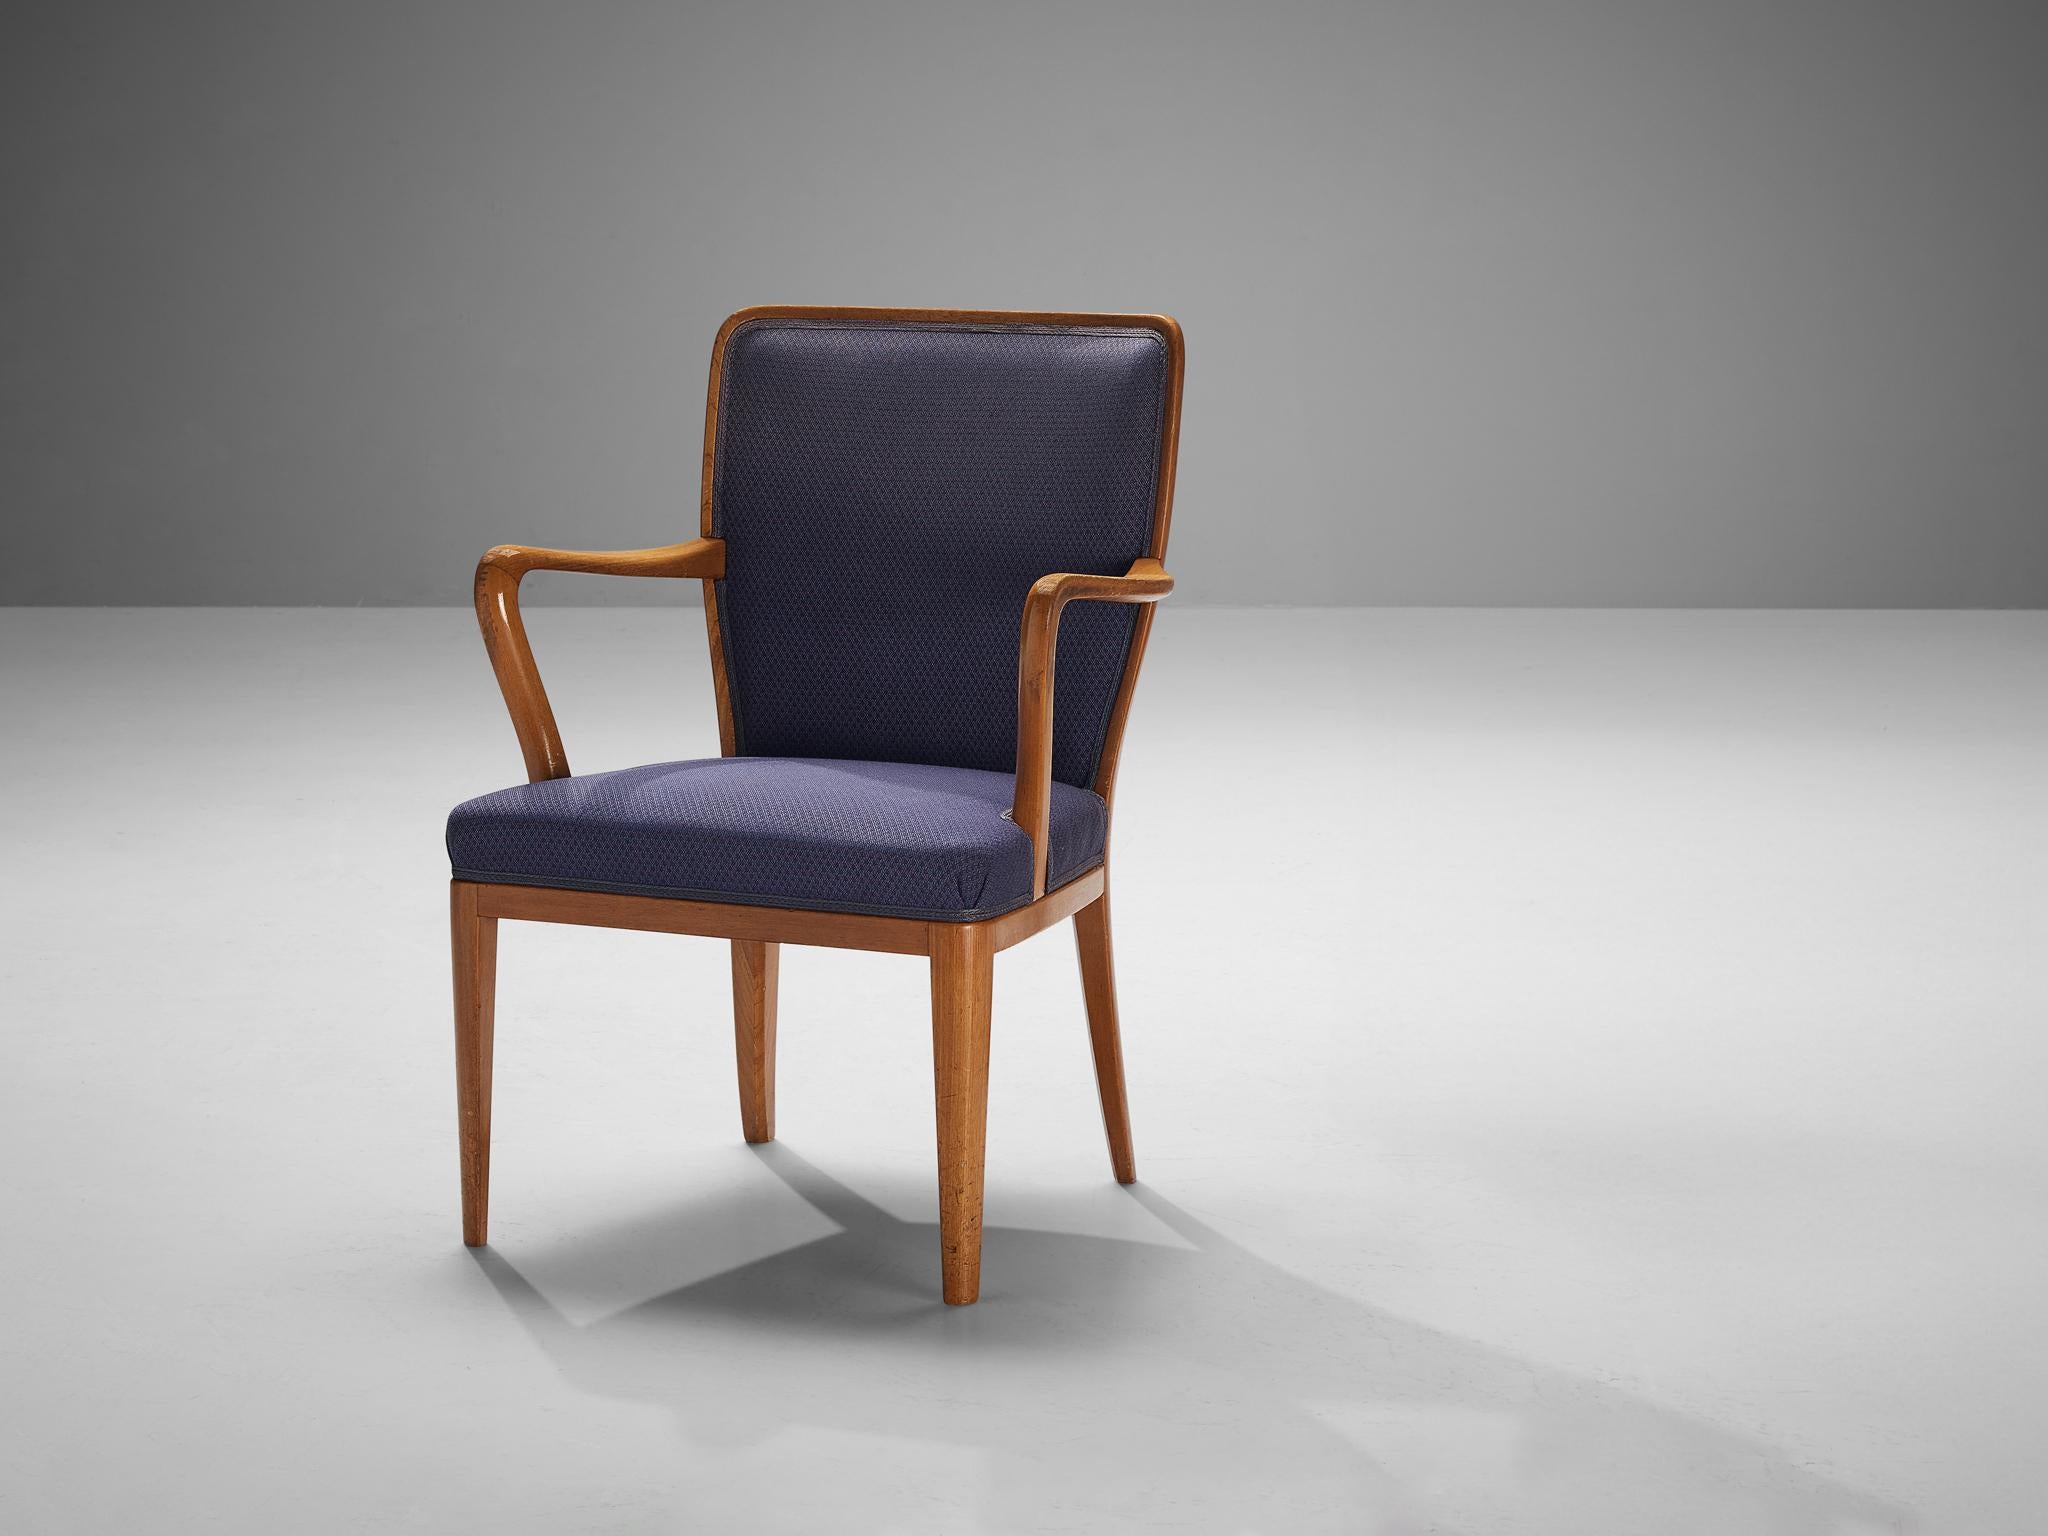 Attributed to Carl Malmsten, armchair, teak, fabric, Sweden, 1950s.

Dining chair in purple upholstery attributed to Carl Malmsten (1888-1972). The unique lines and curves of the design are striking and the tapered wooden legs complement its shape